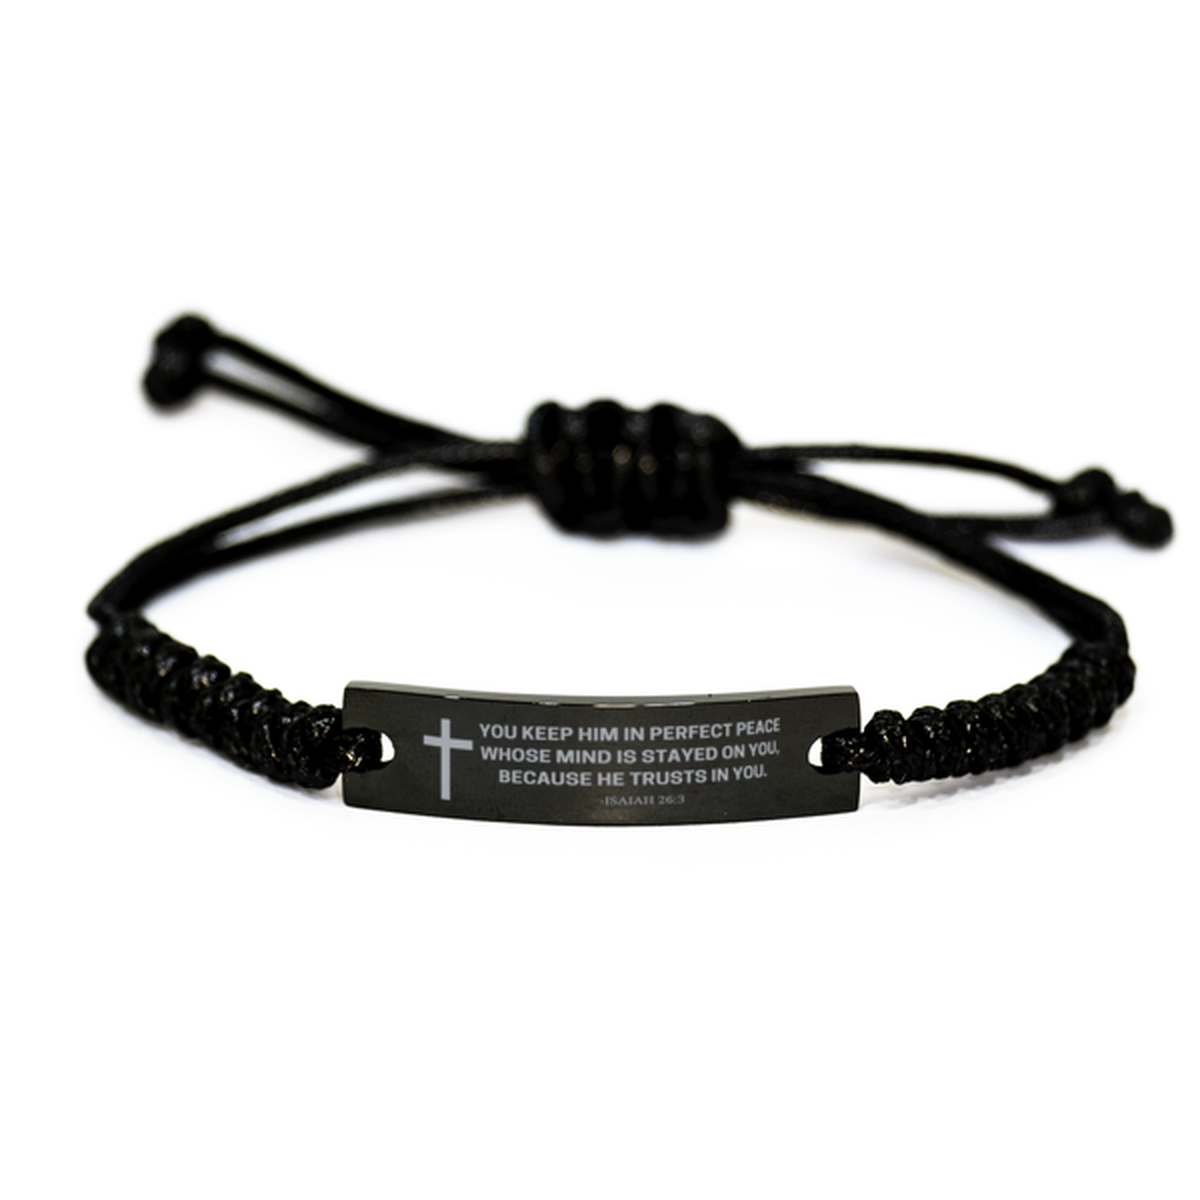 Baptism Gifts For Teenage Boys Girls, Christian Bible Verse Black Rope Bracelet, You keep him in perfect peace, Catholic Confirmation Gifts for Son, Godson, Grandson, Nephew